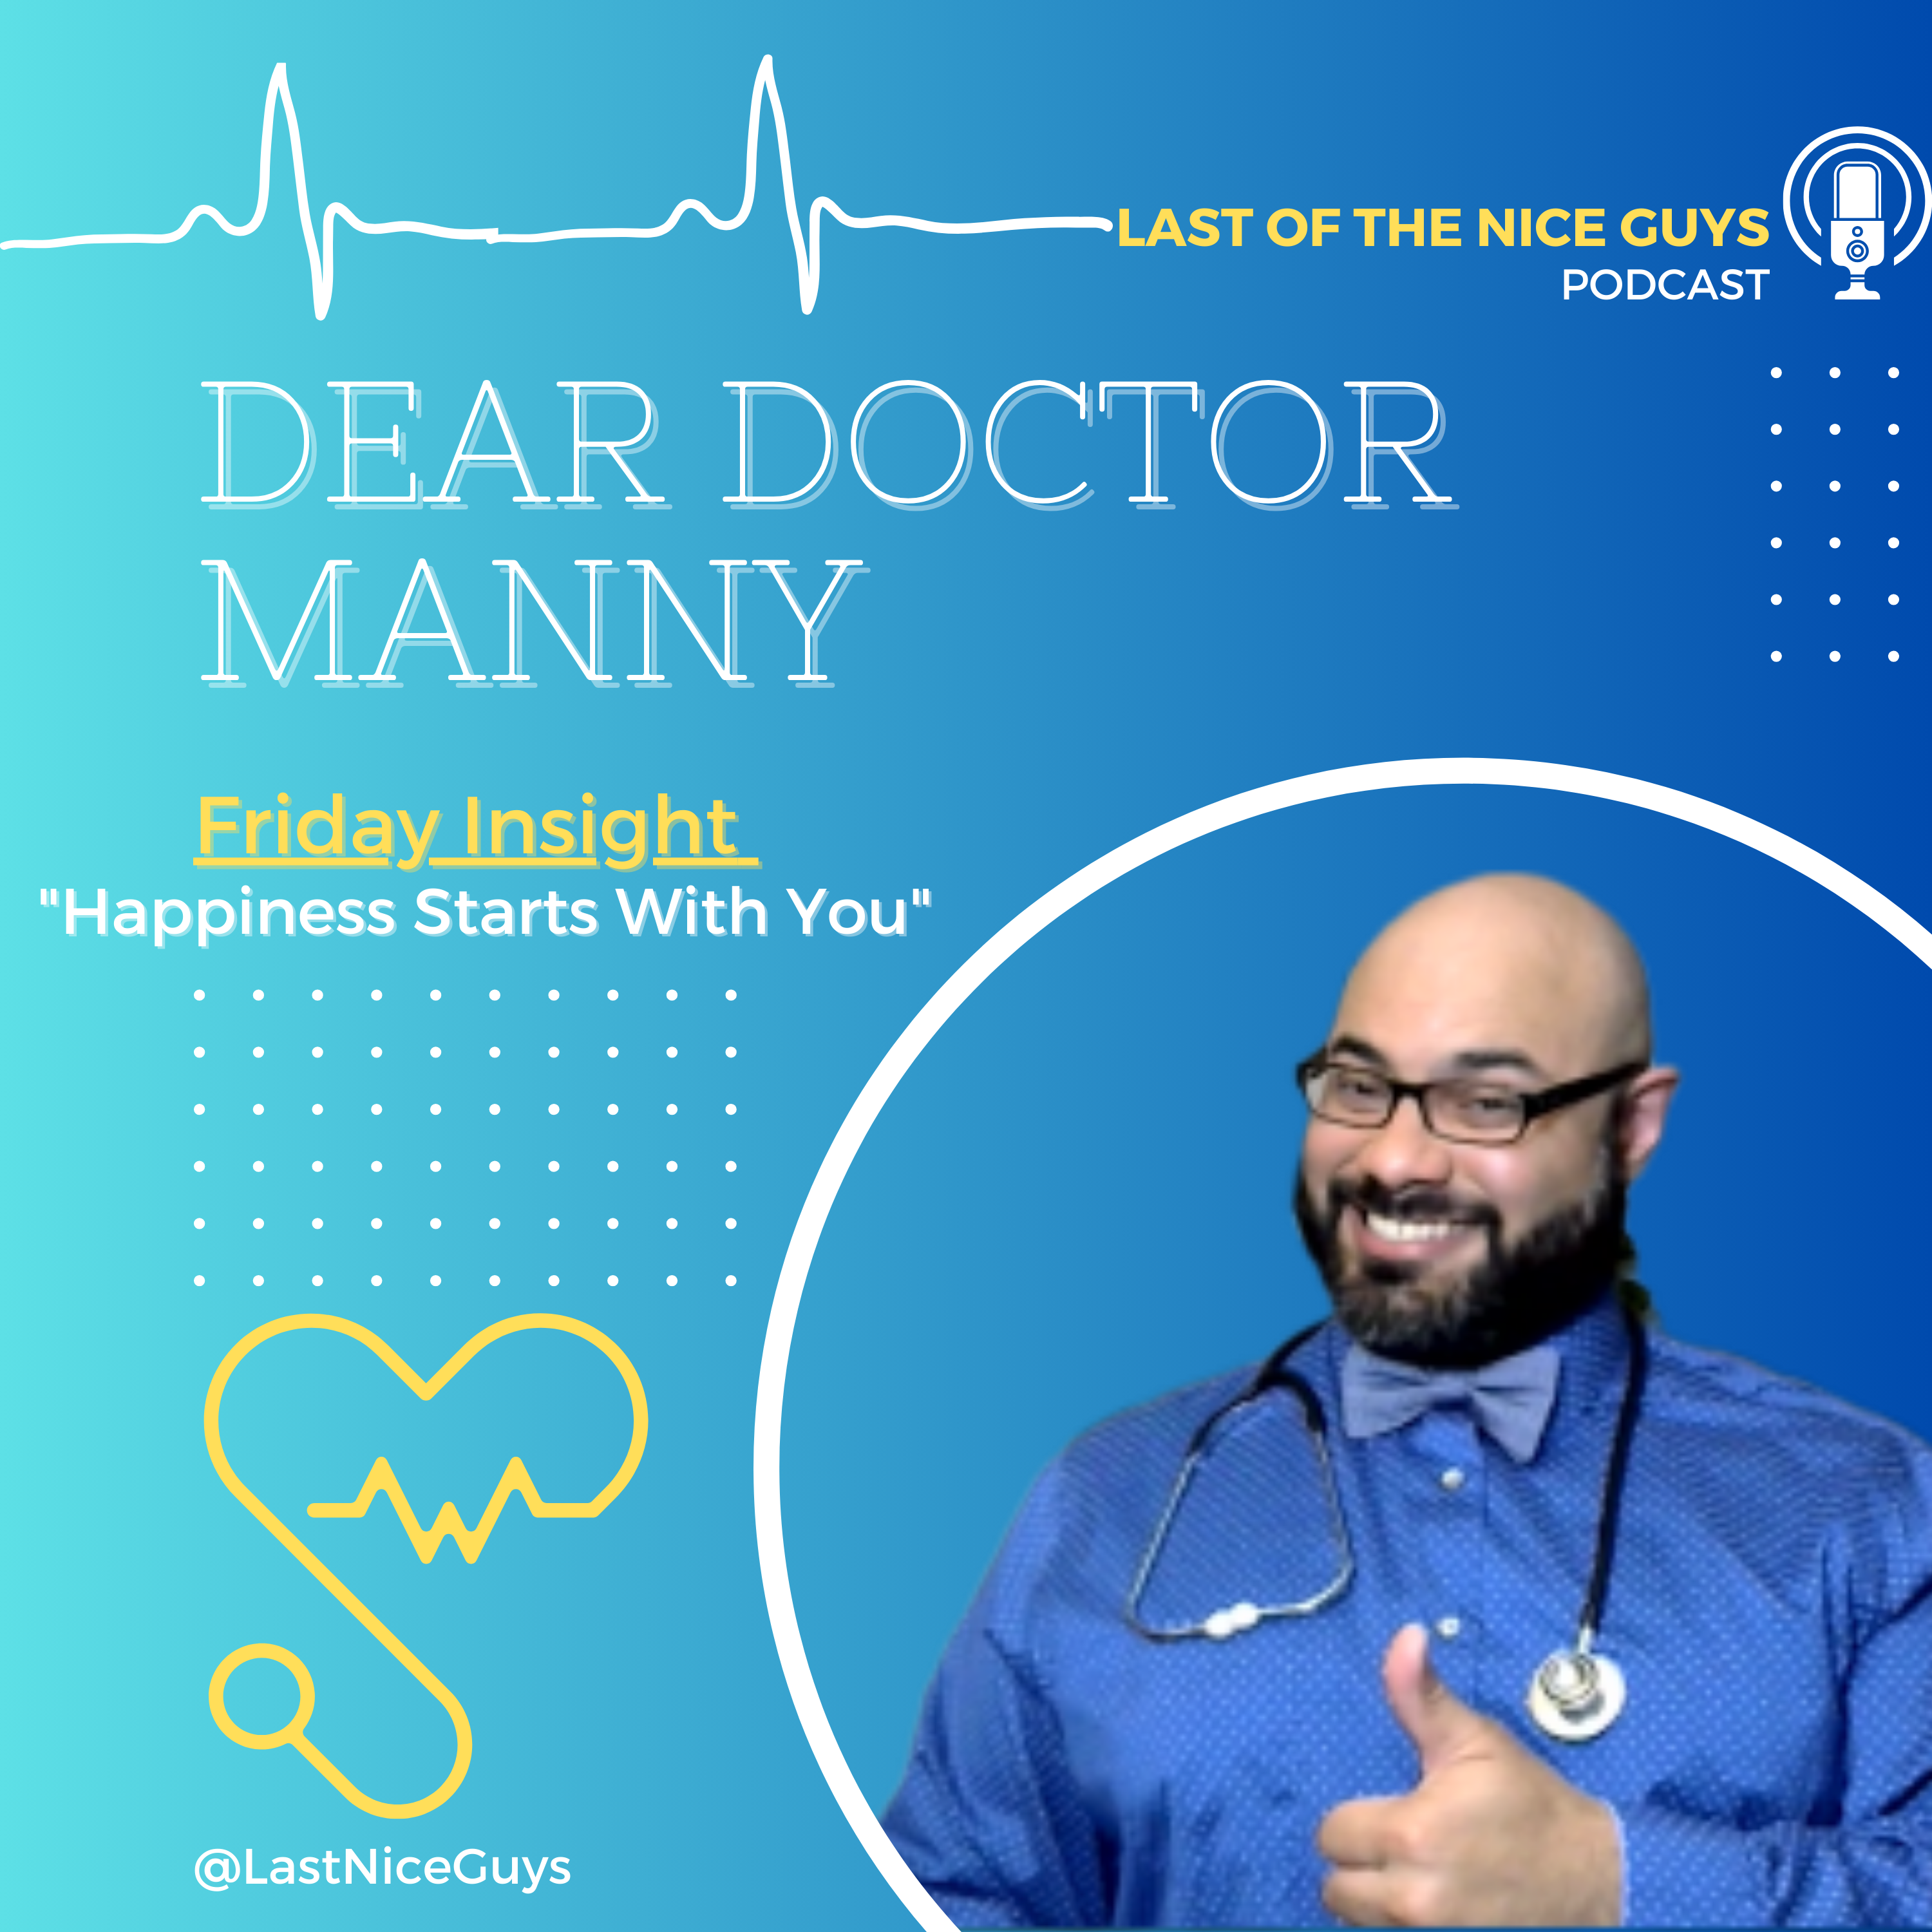 Happiness Starts With You -  "Dear Doctor Manny" Friday Insight